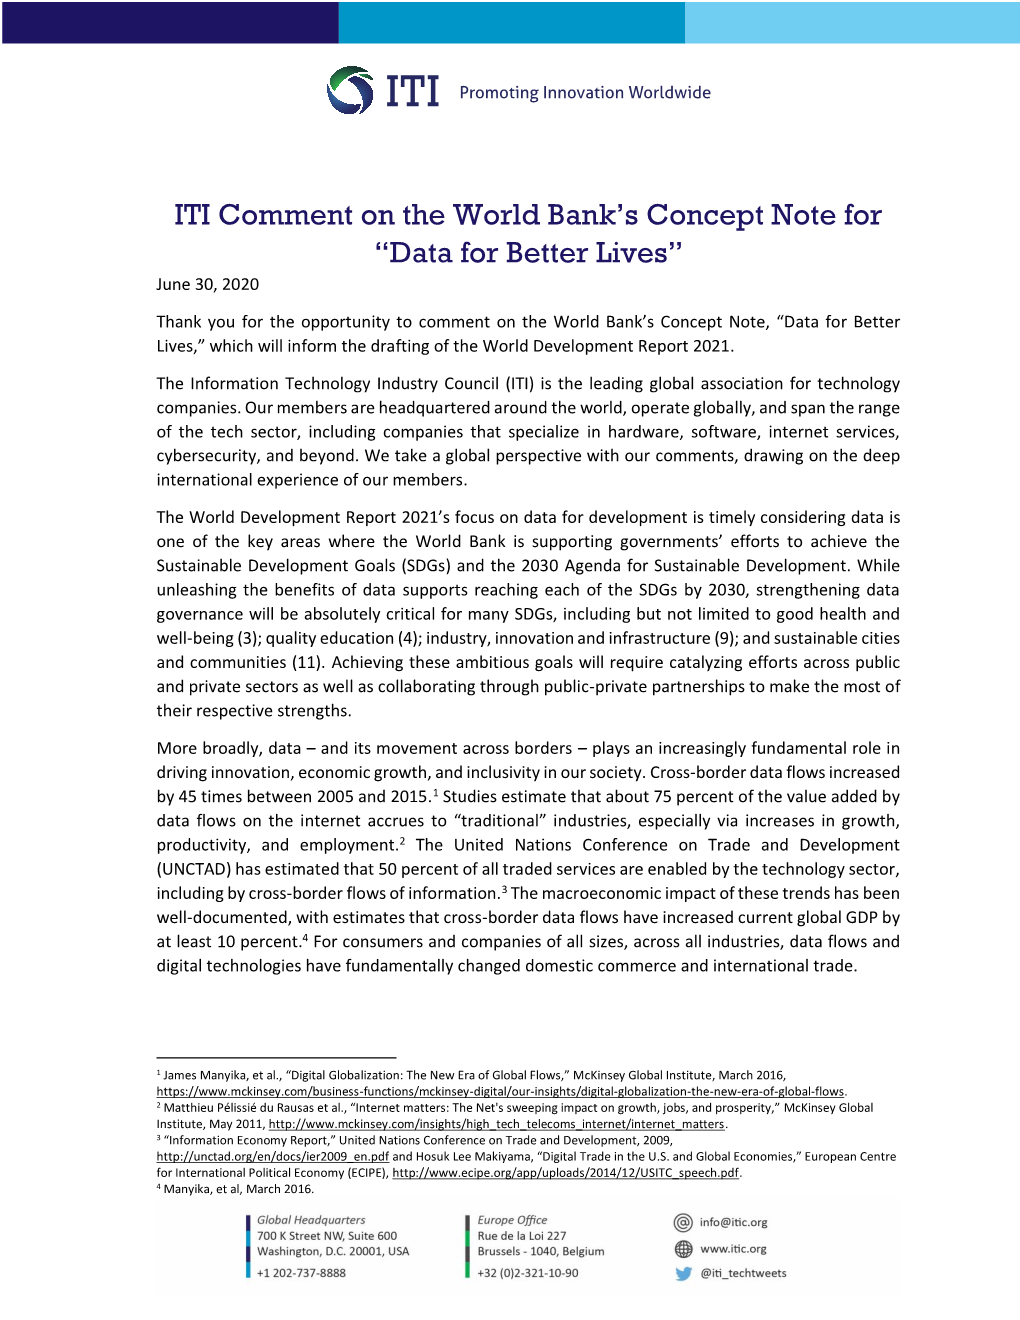 ITI Comment on the World Bank's Concept Note for “Data for Better